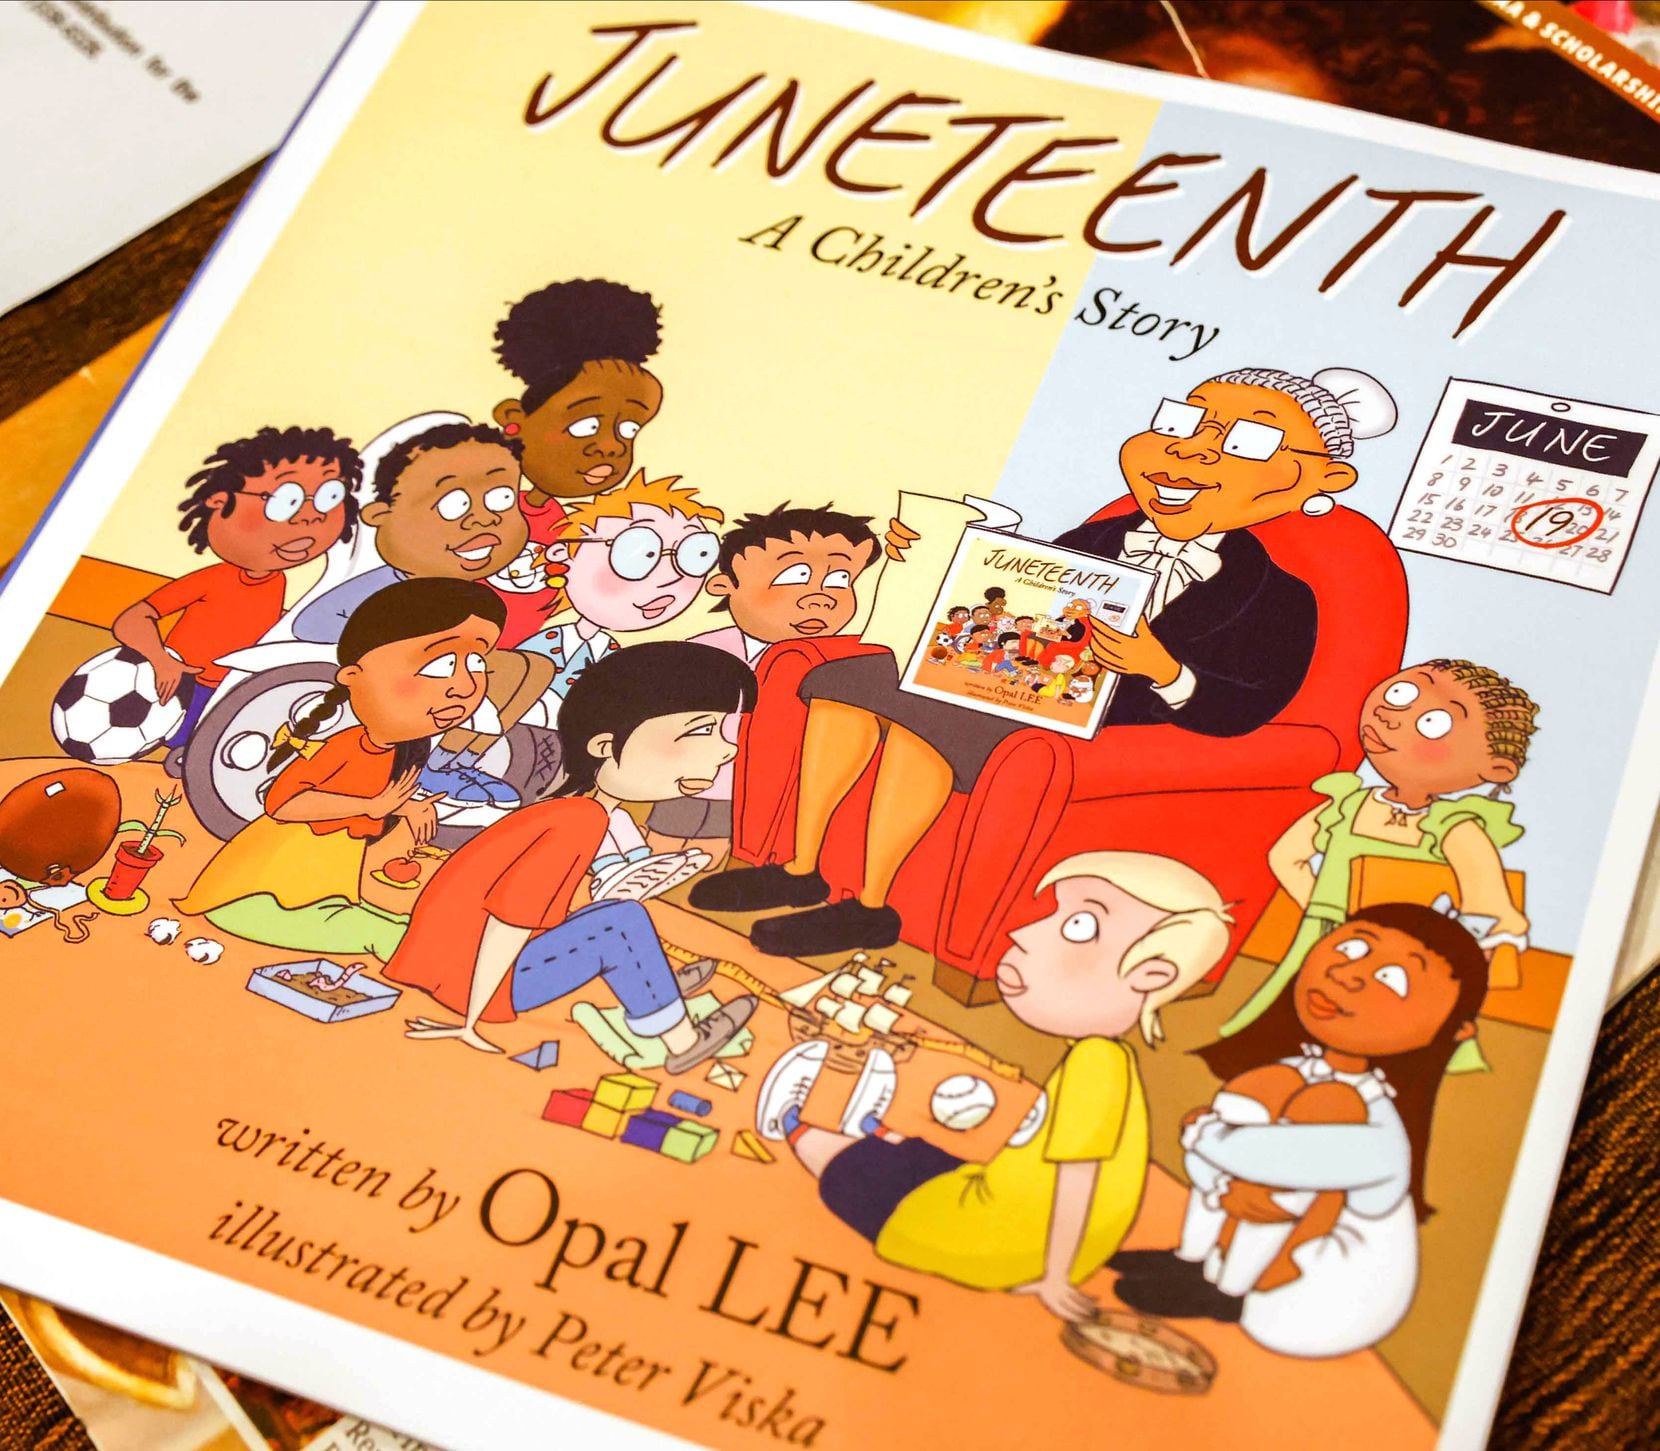 Opal Lee's children book about Juneteenth in her home in Fort Worth on Friday, December 10, 2021.